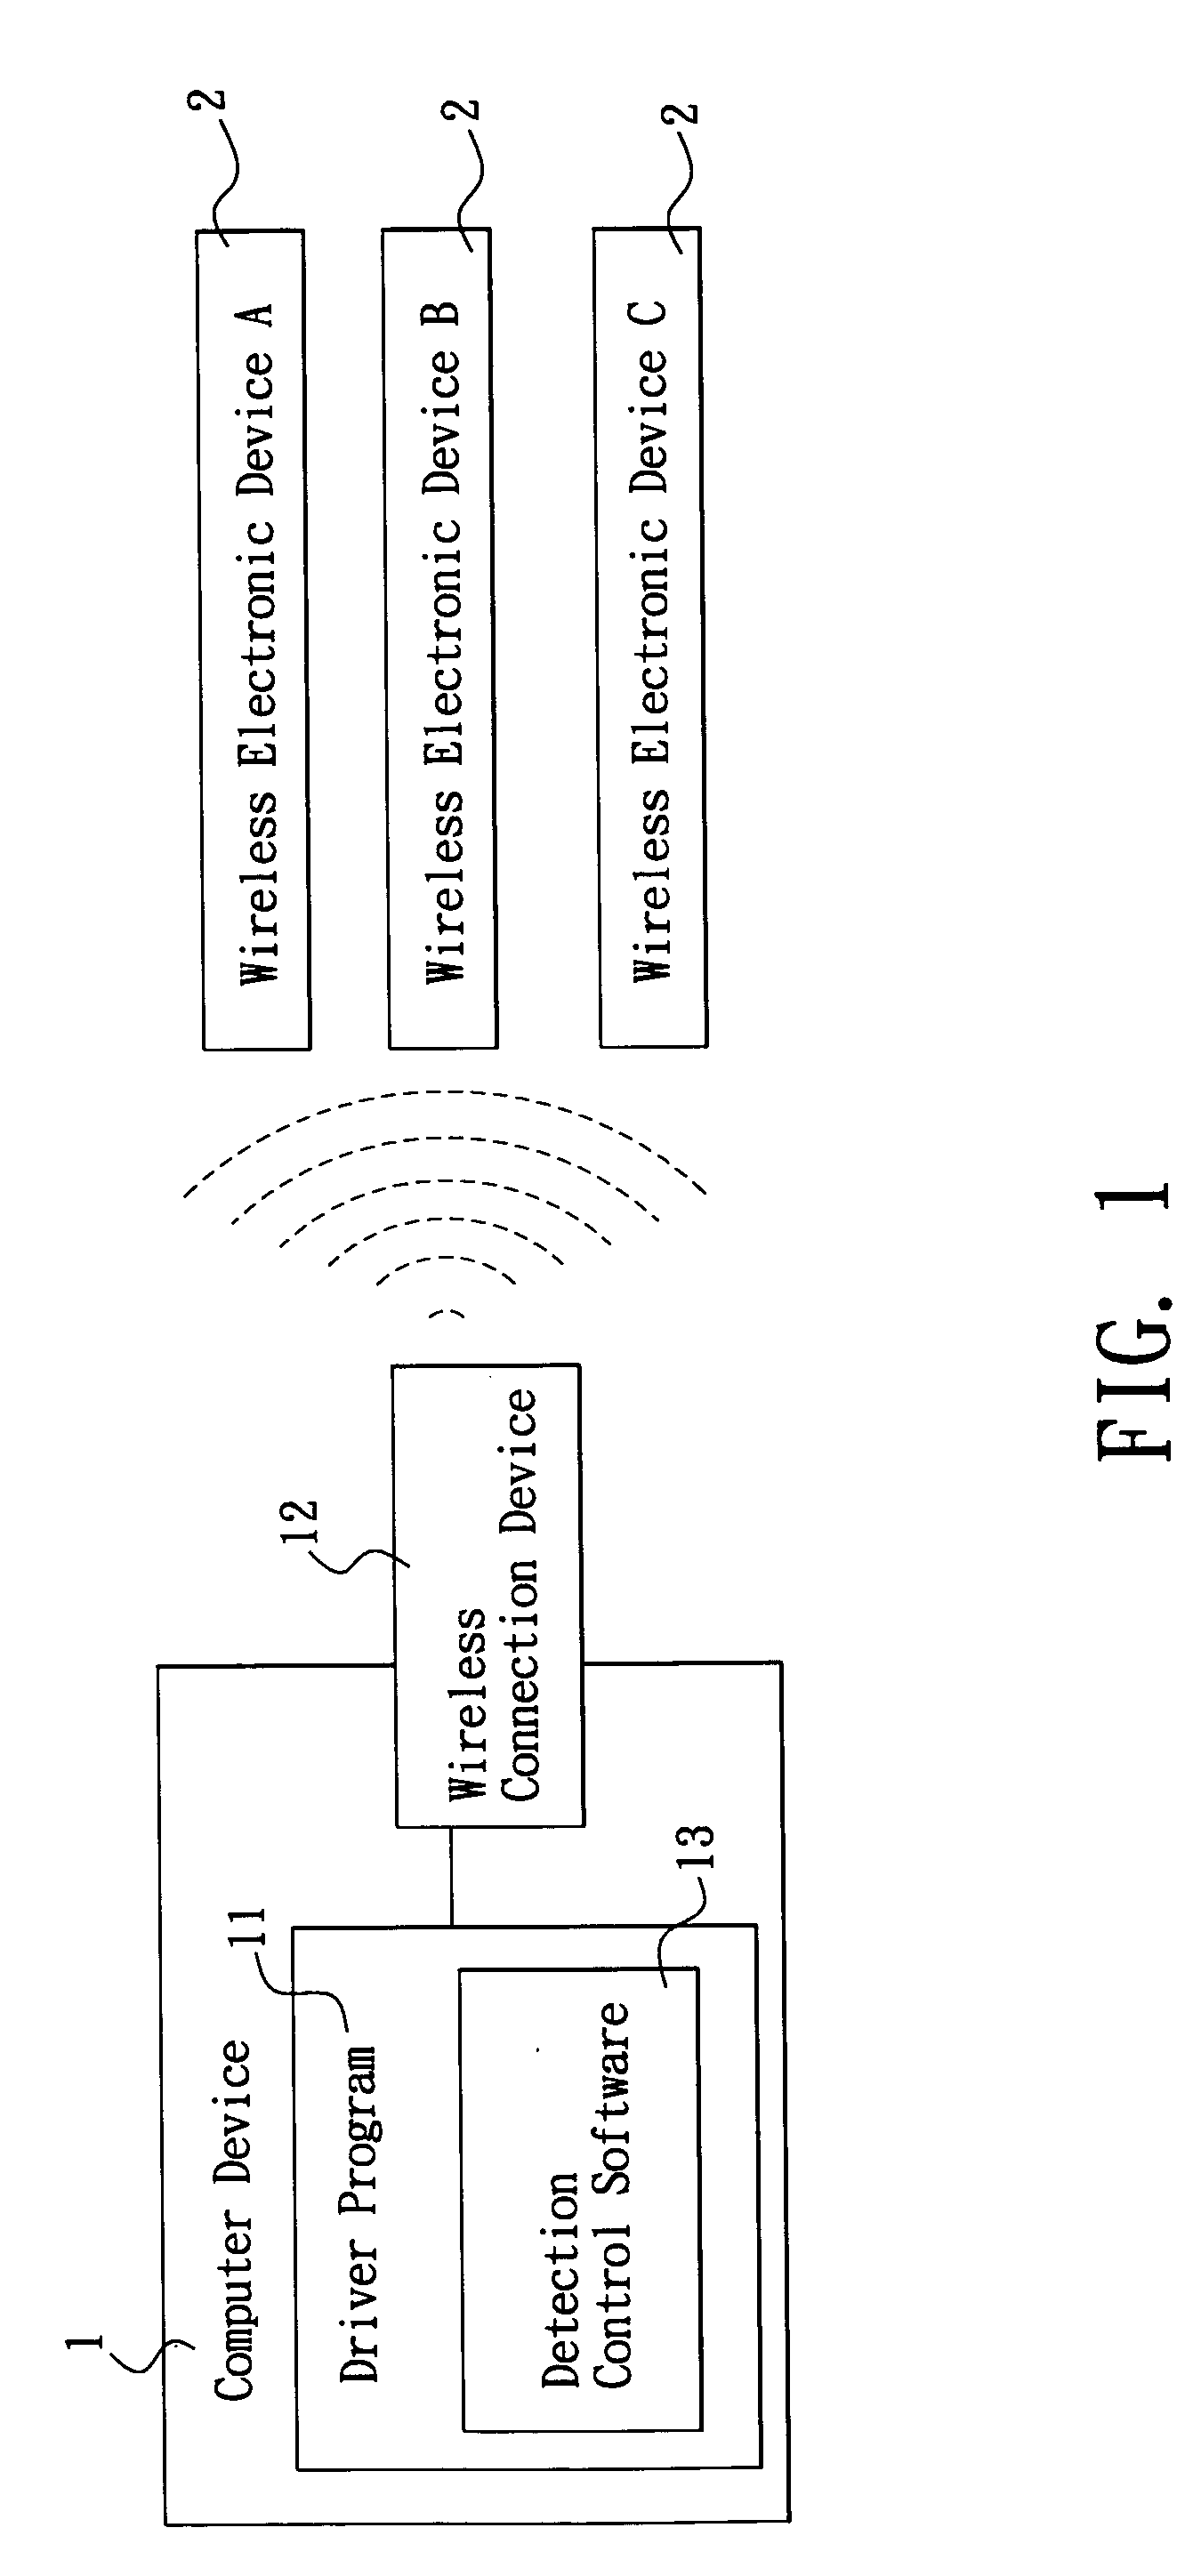 Control method for setting up operation time of wireless connection device